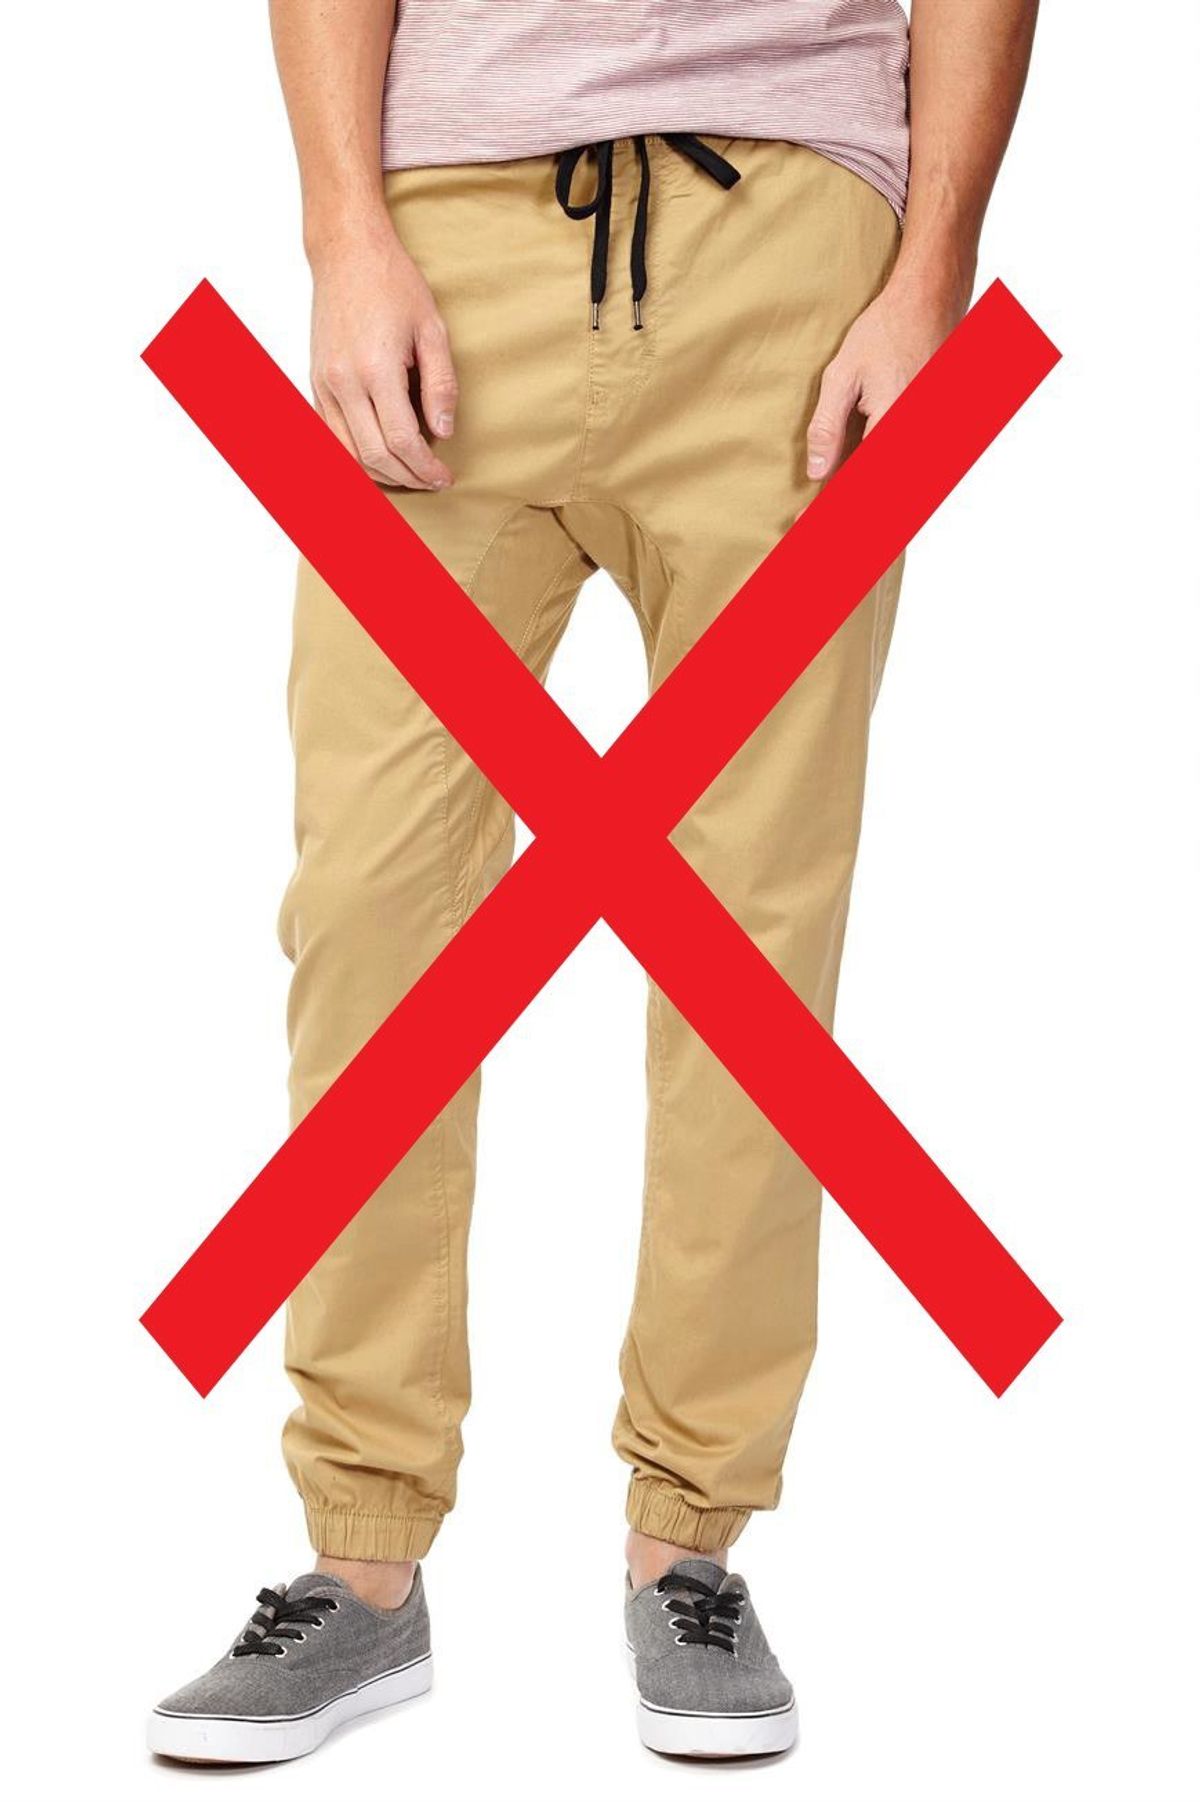 Why Jogger Pants are Dead